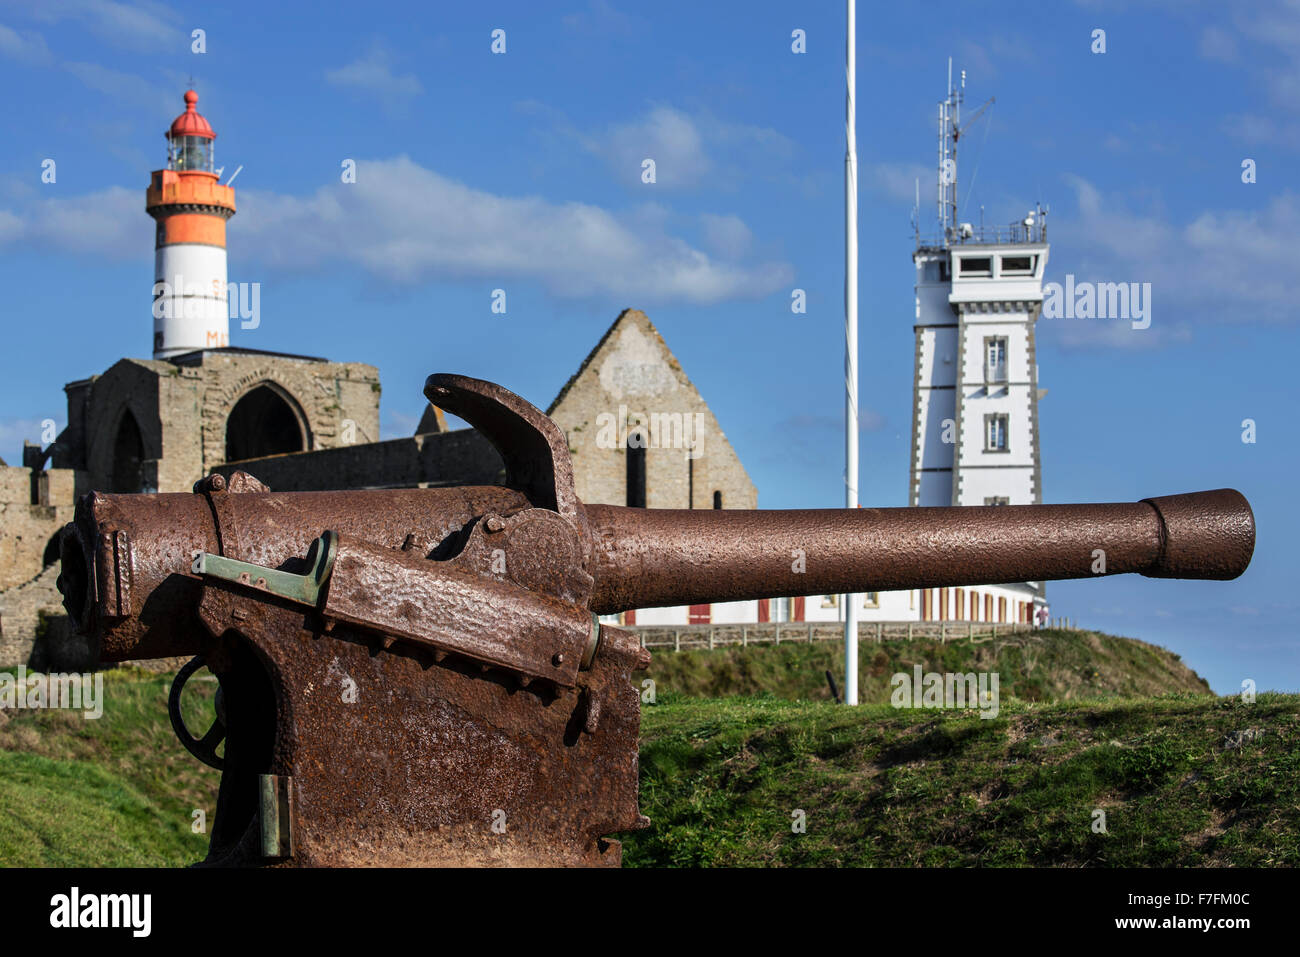 Lahitolle 95 mm cannon, French 19th century cannon at the Pointe Saint-Mathieu, Finistère, Brittany, France Stock Photo